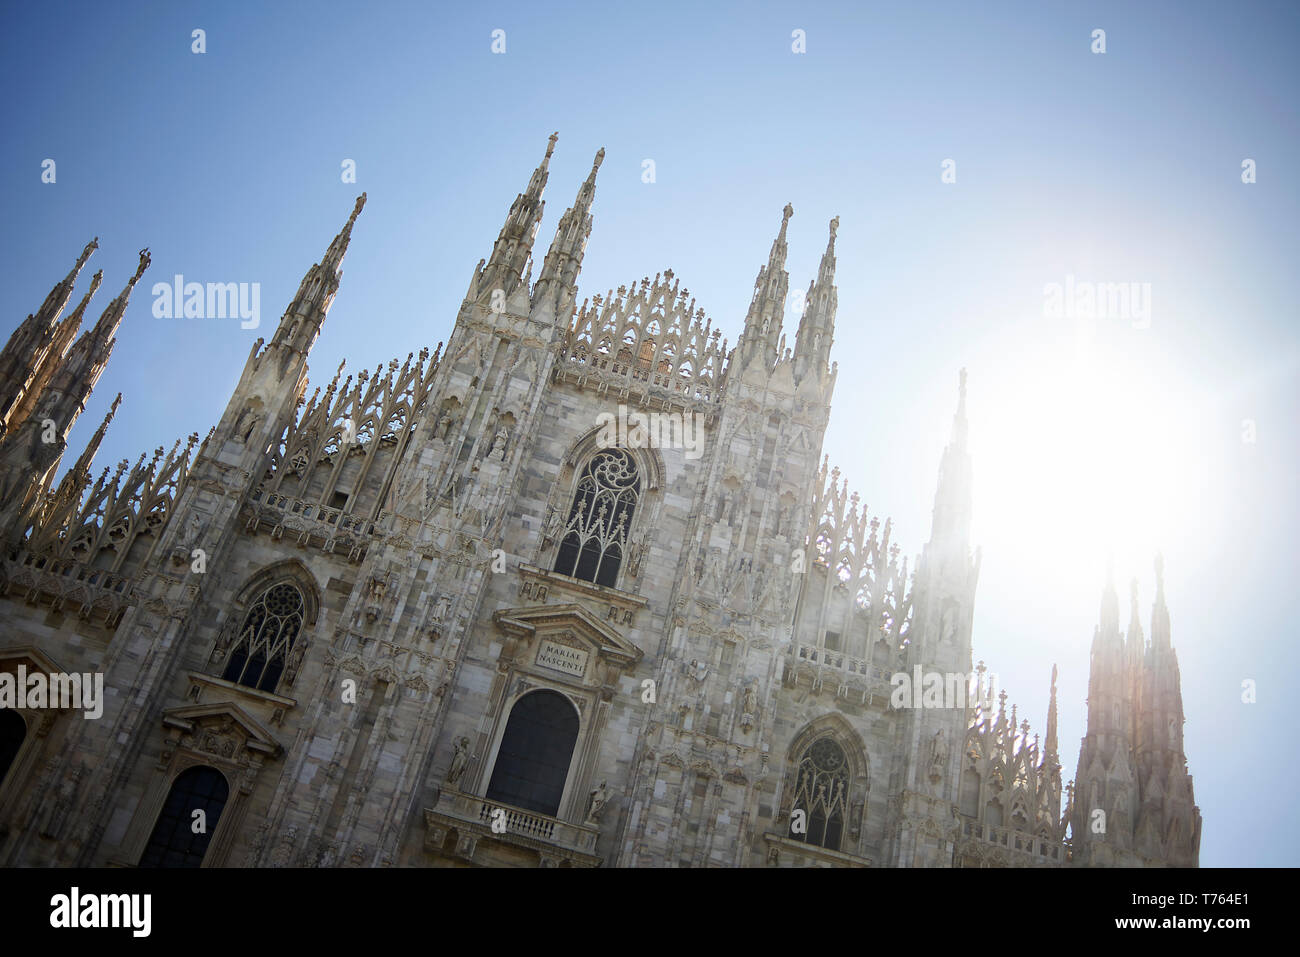 Tram Milan City Centre Italy High Resolution Stock Photography And Images Alamy